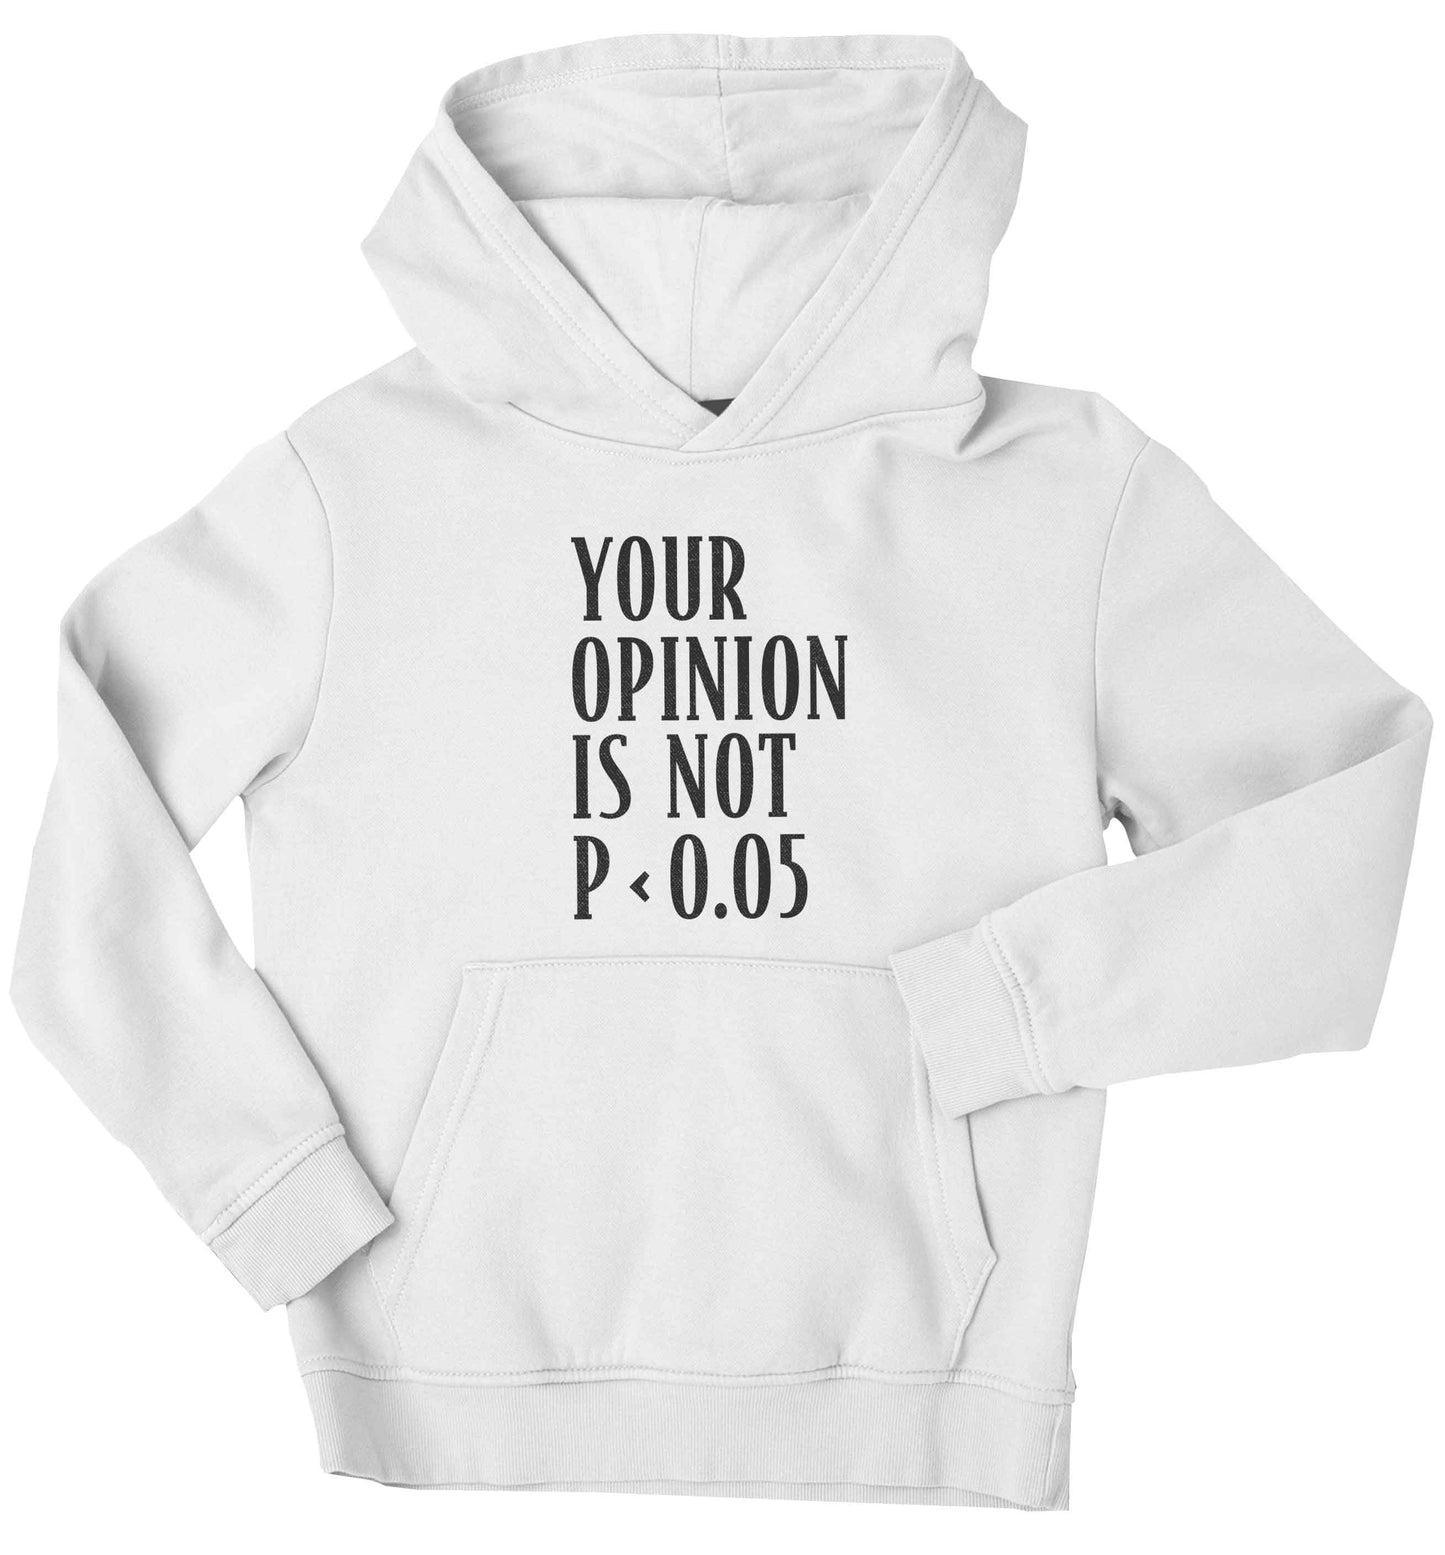 Your opinion is not P < 0.05children's white hoodie 12-13 Years